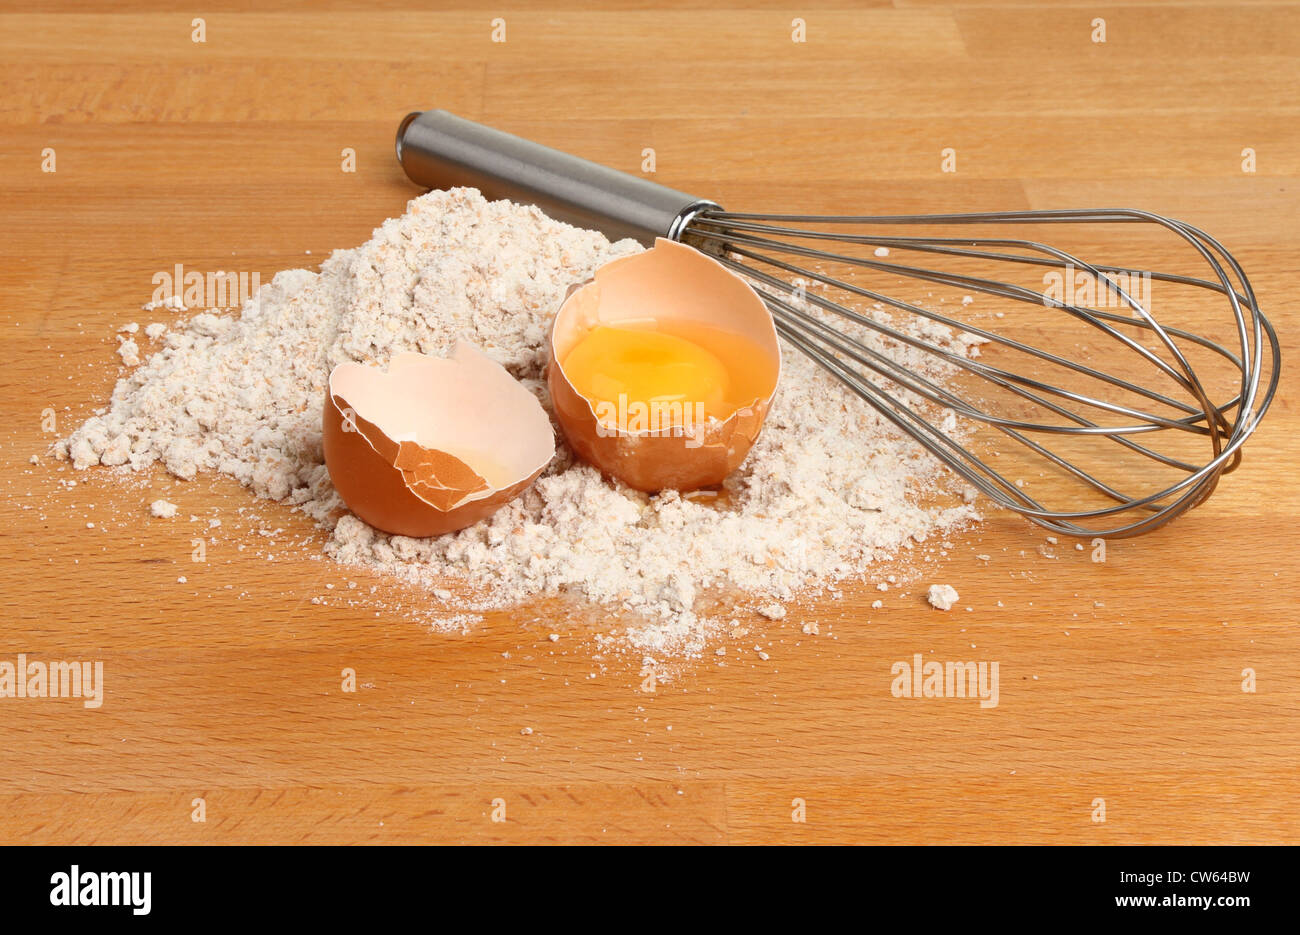 Wholegrain flour with a cracked egg and whisk on a wooden worktop Stock Photo